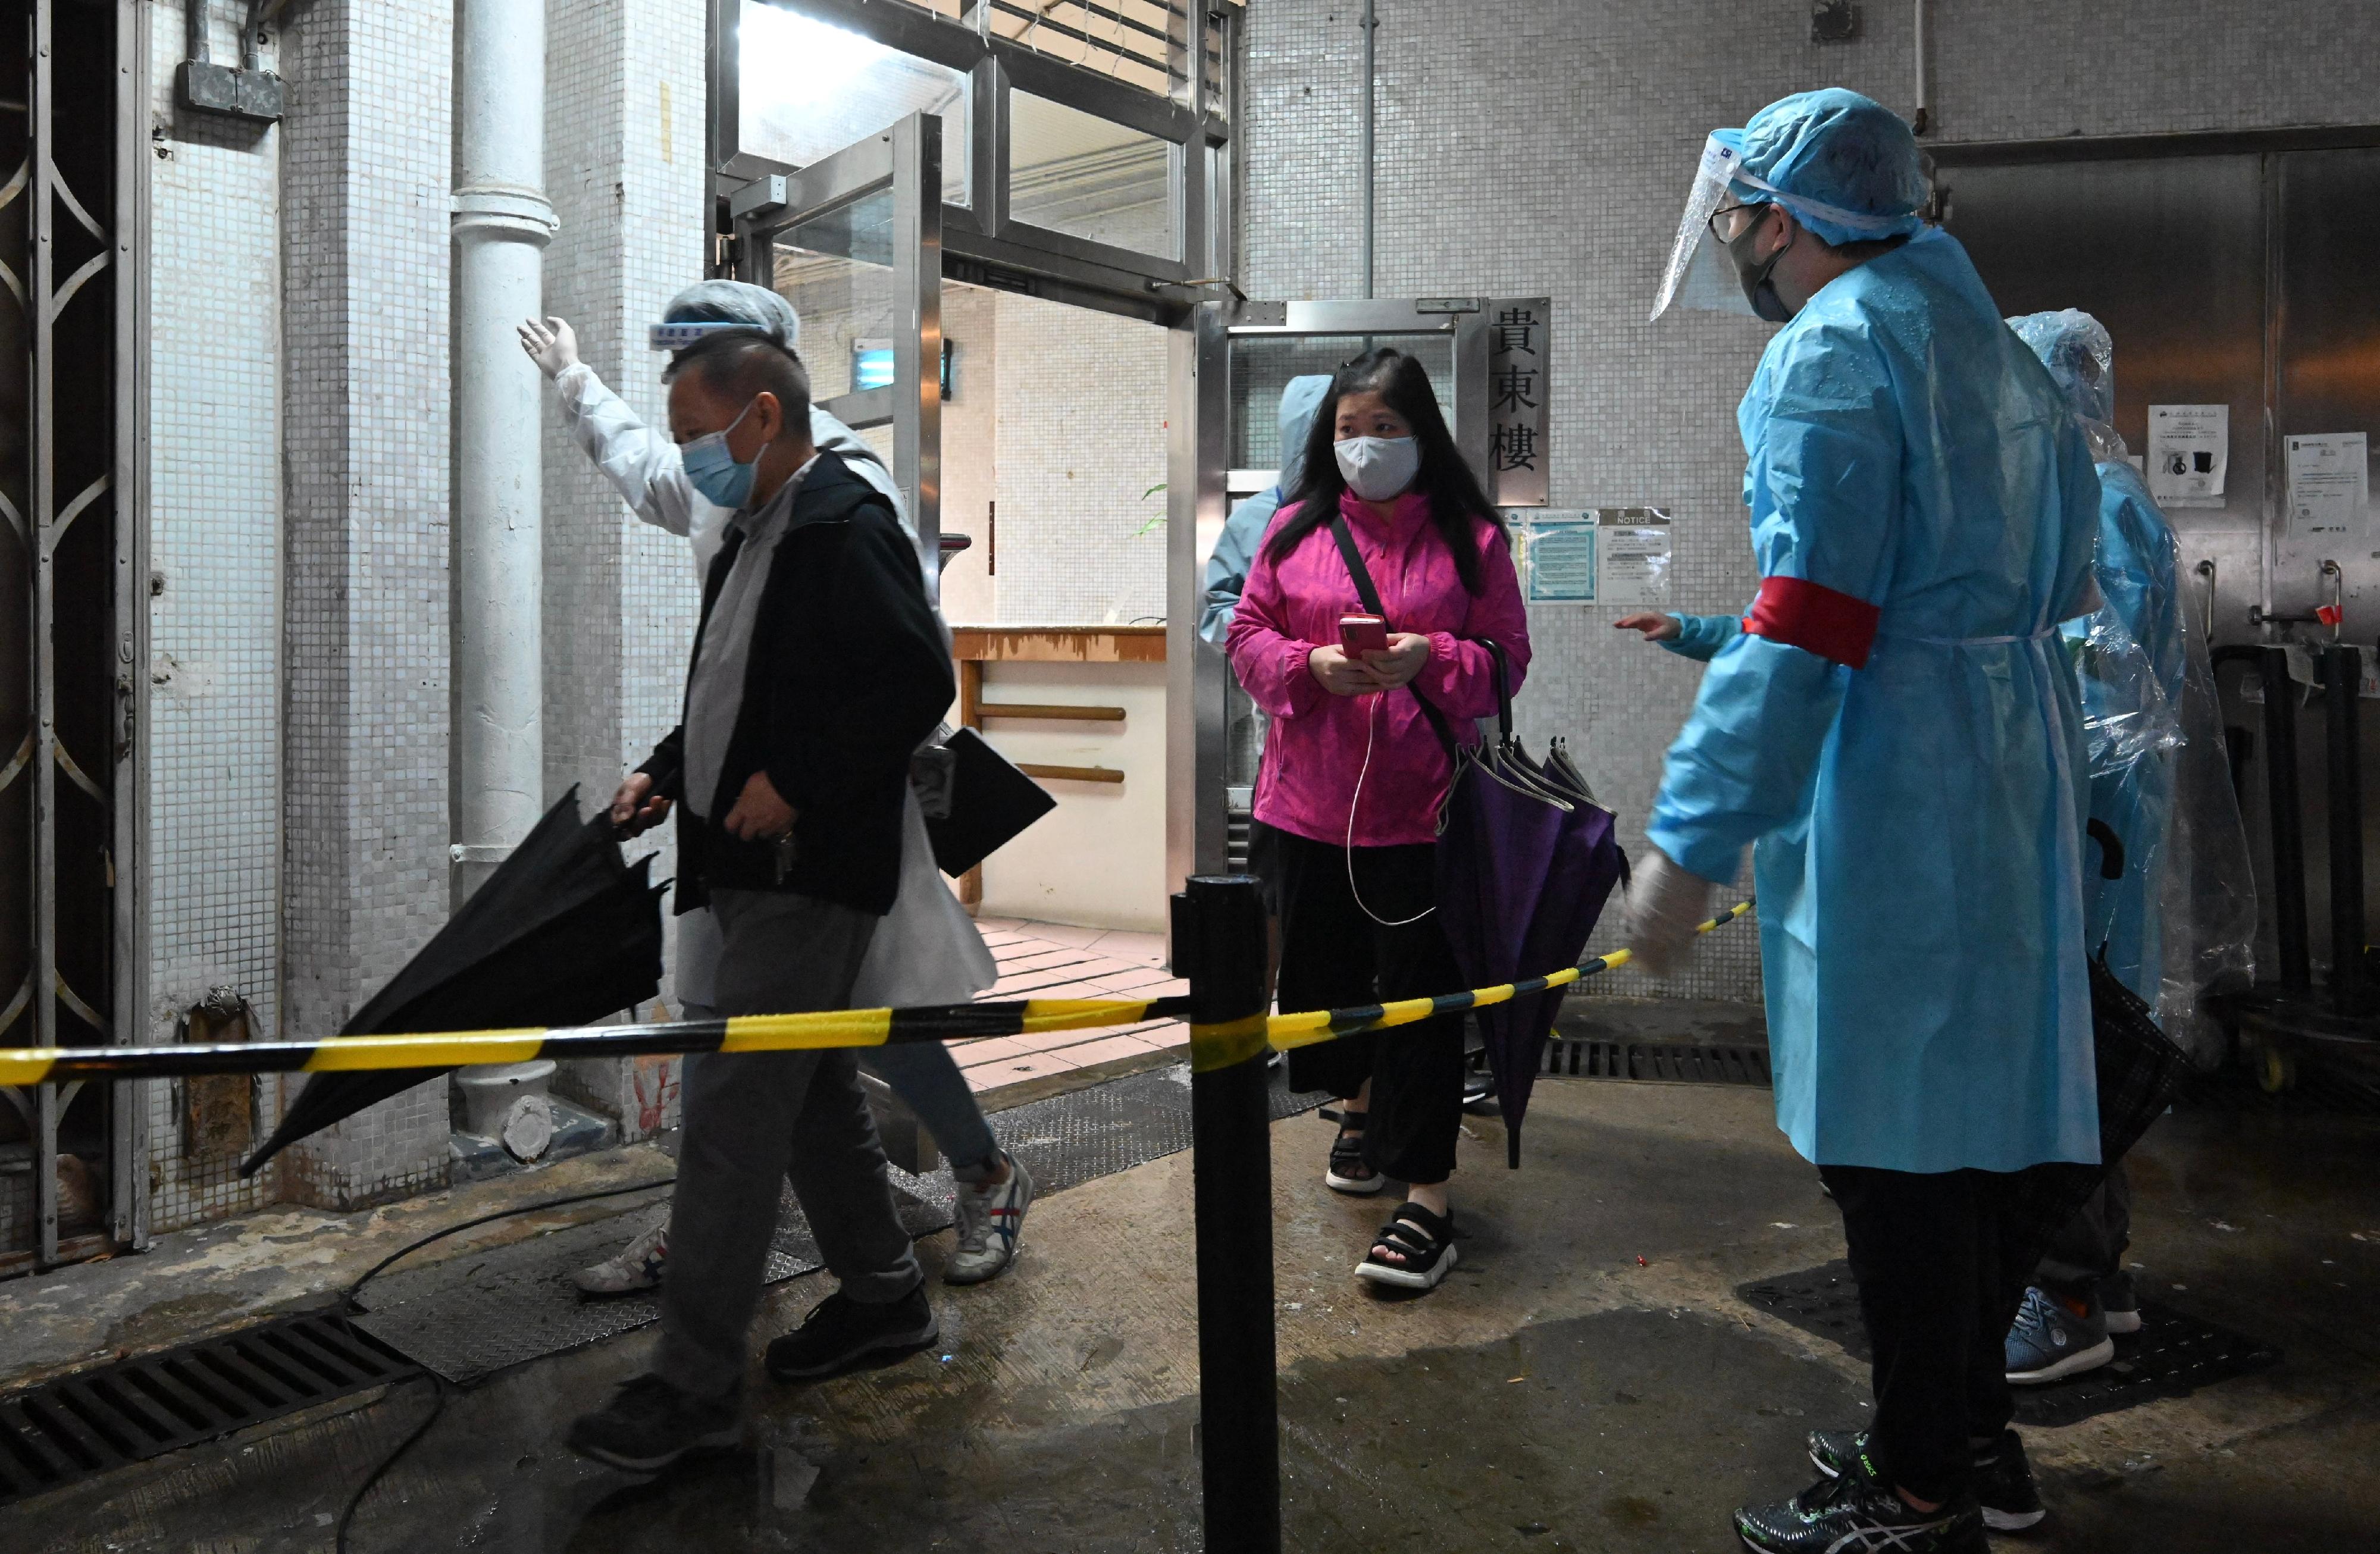 The Labour and Welfare Bureau today (March 24) completed a "restriction-testing declaration" operation in the specified "restricted area" of Wong Tai Sin. Photo shows officers guiding residents subject to compulsory testing to specimen collection stations in batches to undergo a nucleic acid test yesterday evening (March 23).